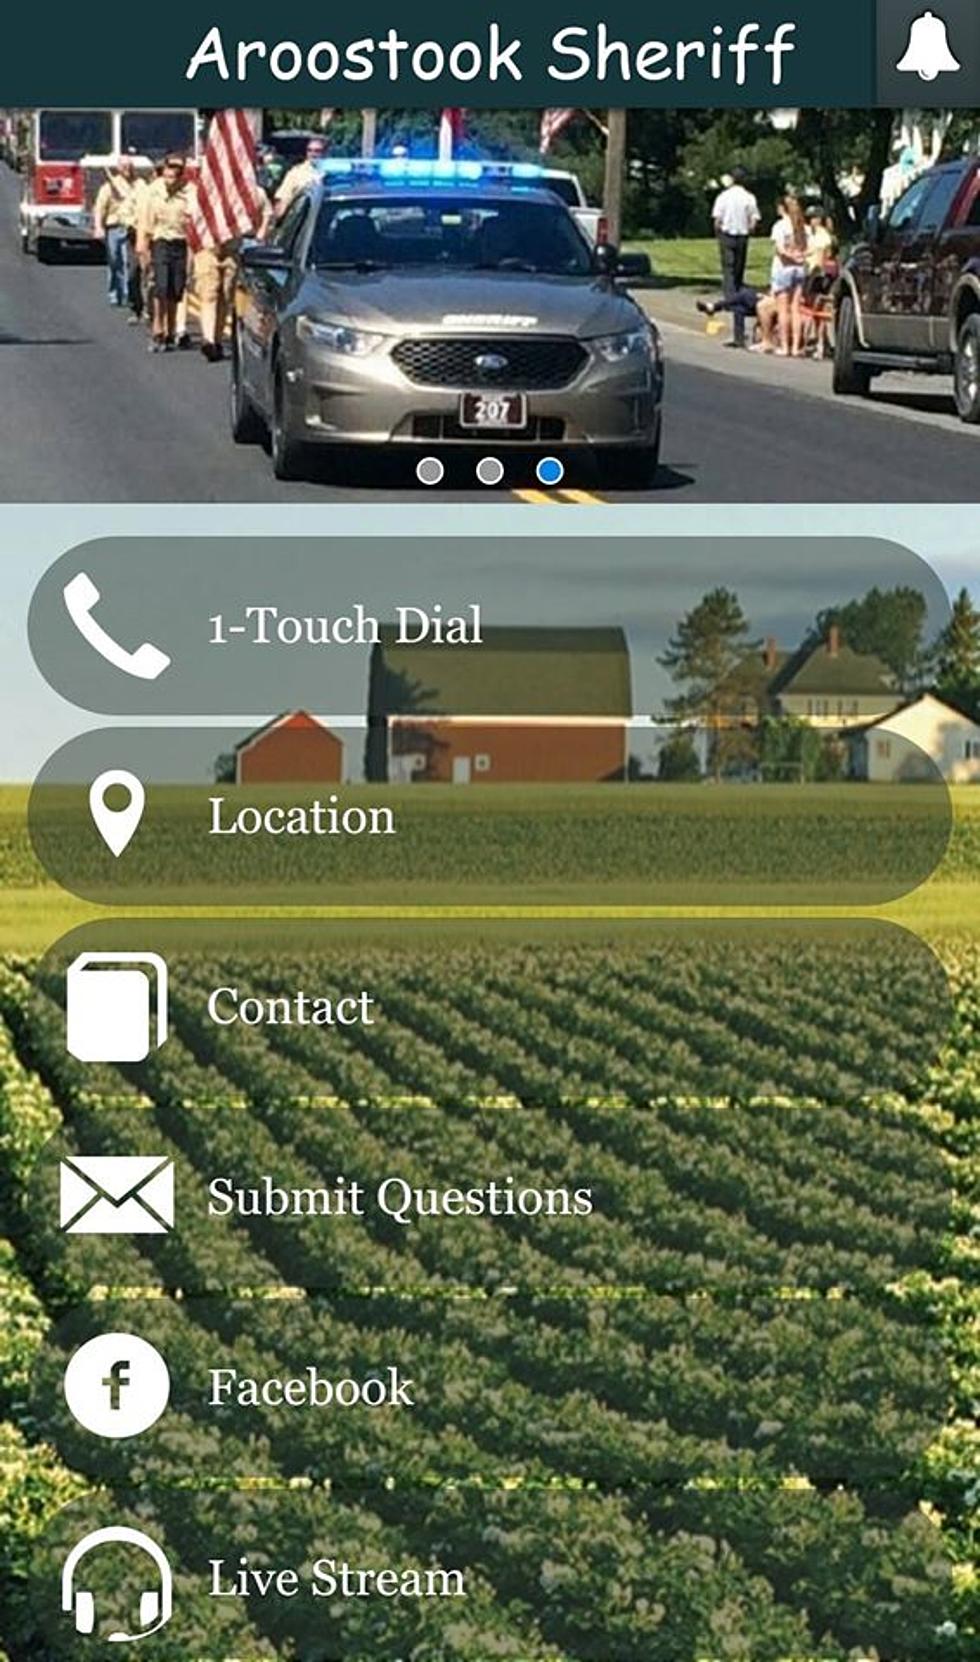 Aroostook County Sheriff Announces New App For Closer Public Contacts